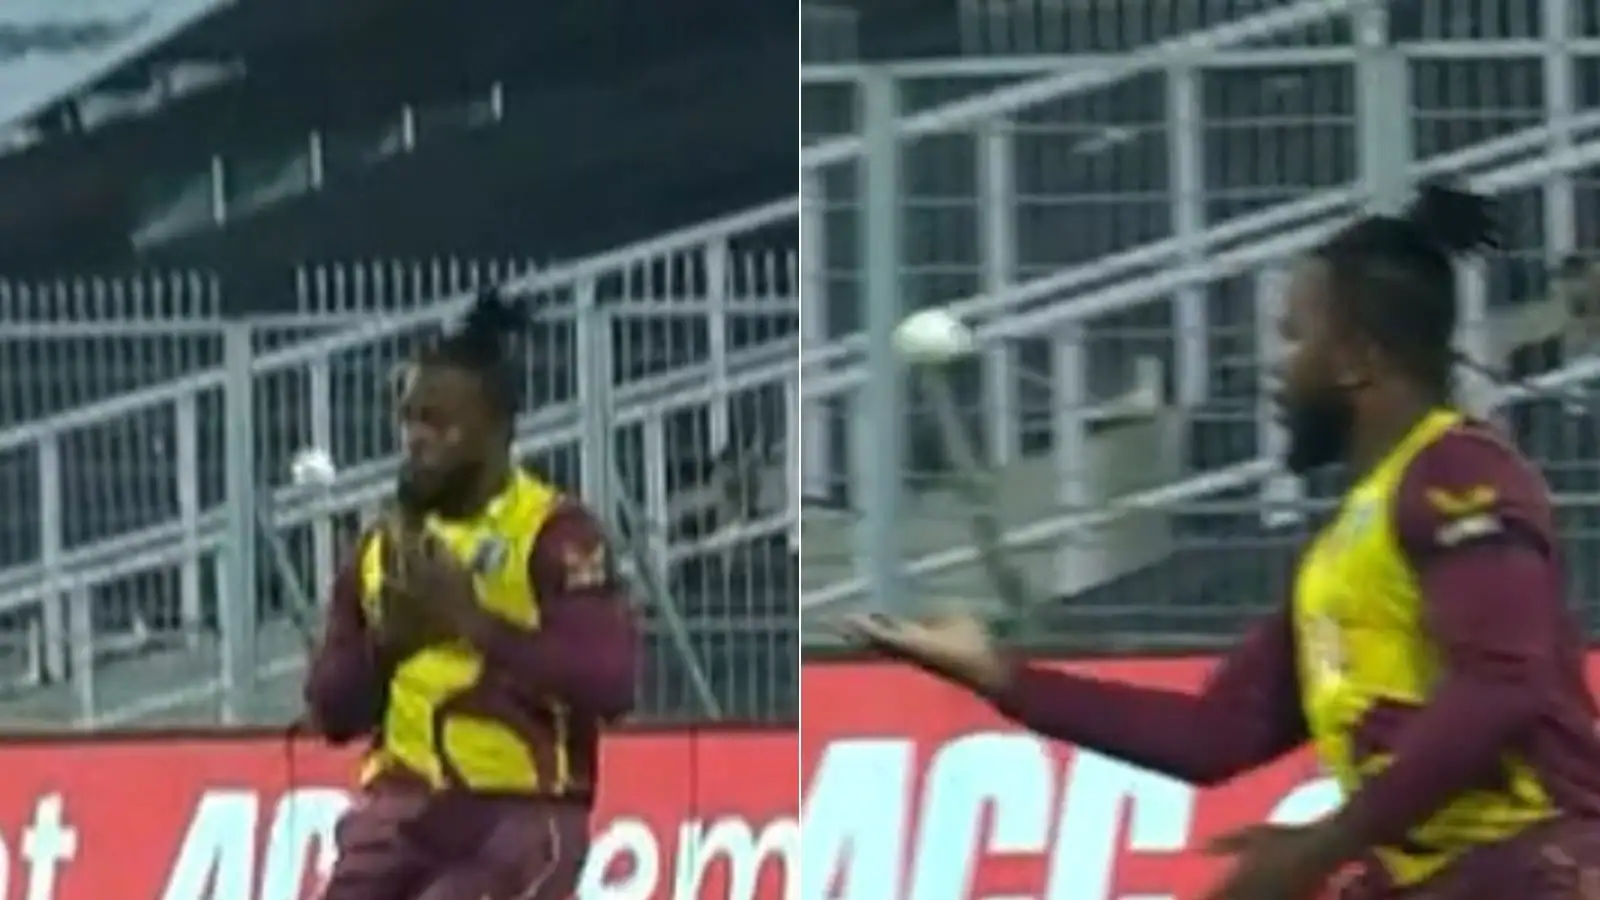 IND vs WI, third ODI: Almost Dropped – Kyle Mayers Takes a Juggling Catch to Remove Ruturaj Gaikwad